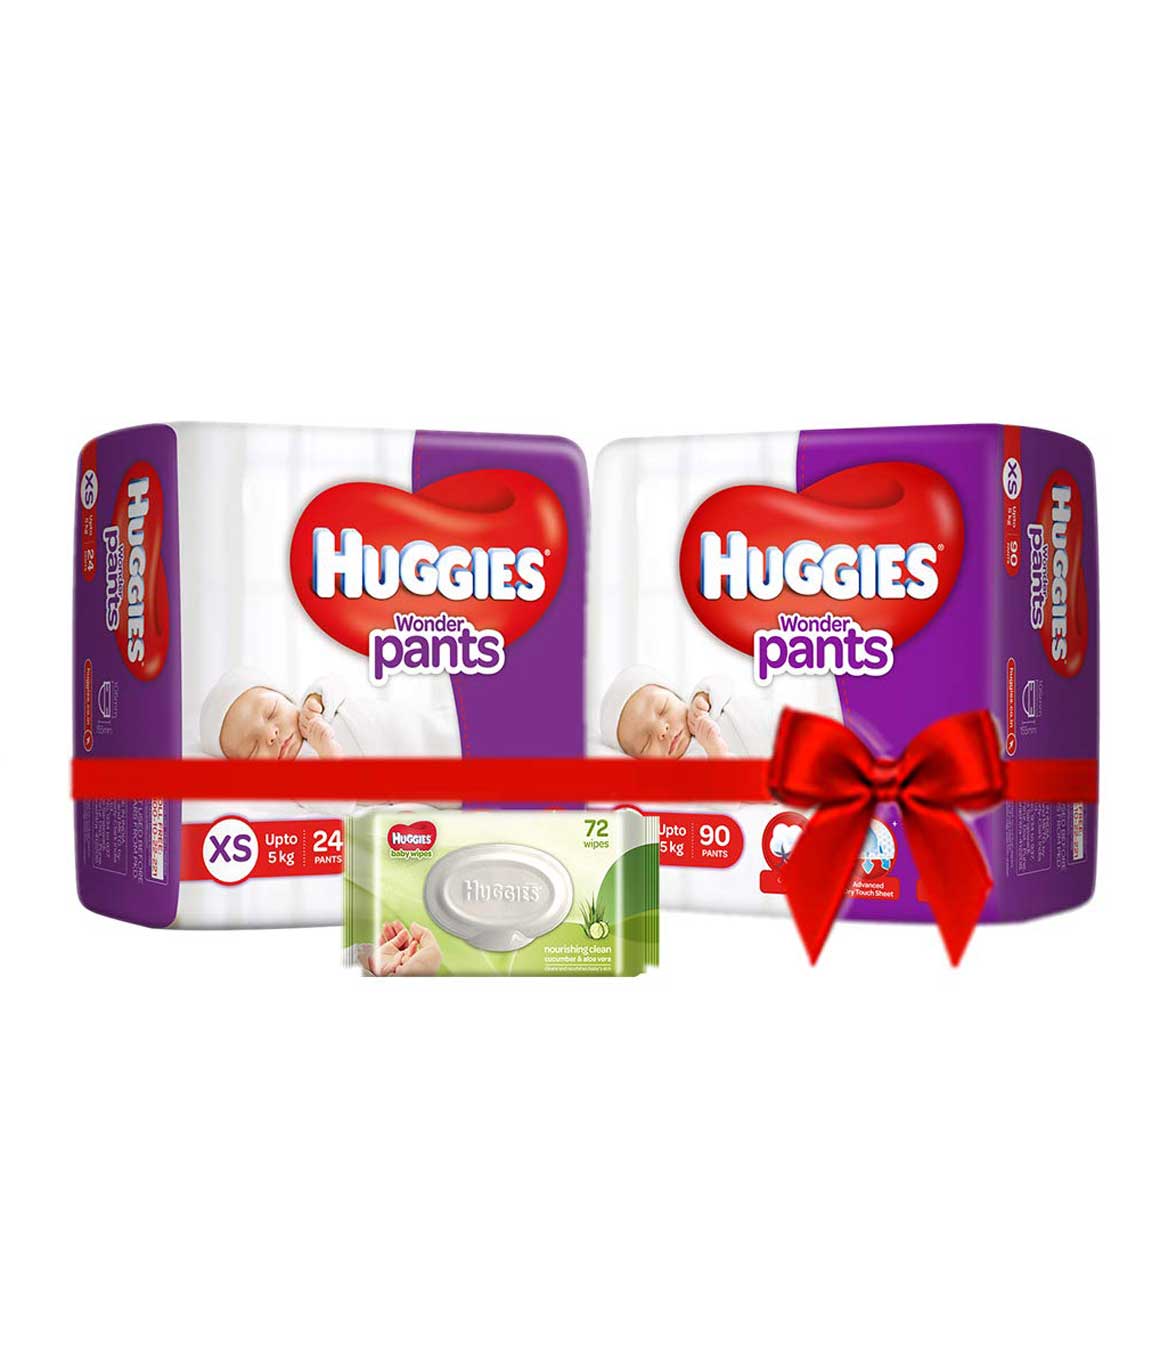 Huggies Diapers Manufacturers, Suppliers, Dealers & Prices